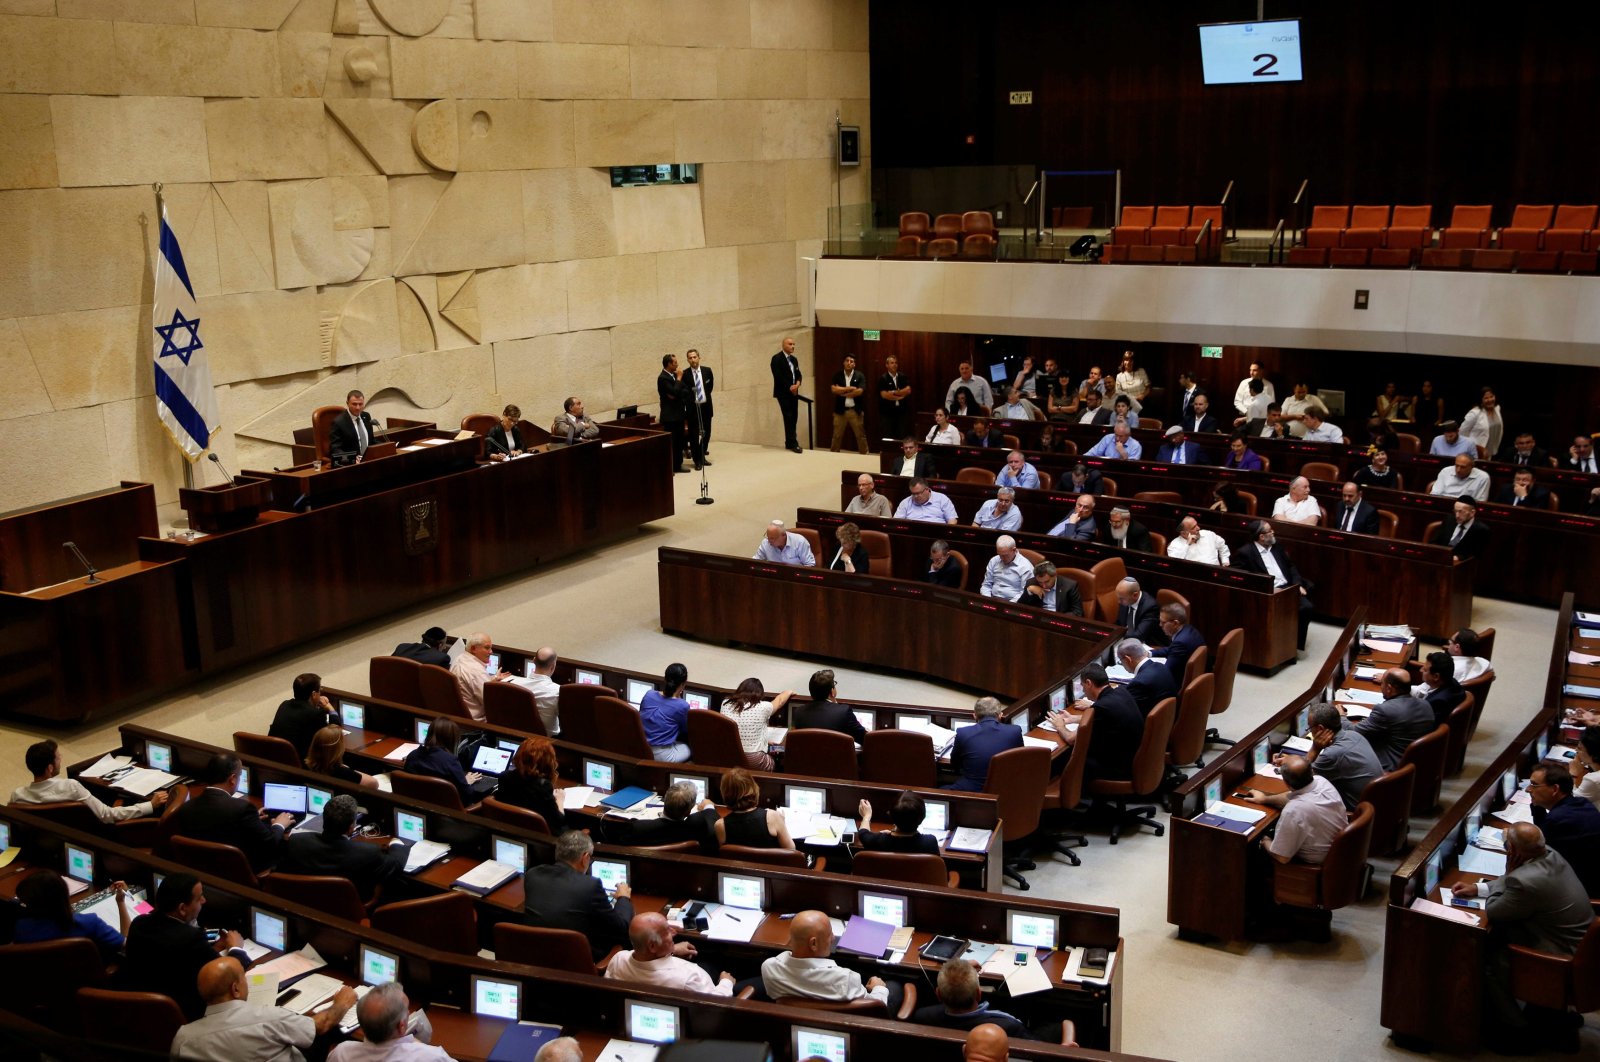 The plenum during a session at the Knesset, the Israeli parliament, Jerusalem, July 11, 2016. (Reuters Photo)